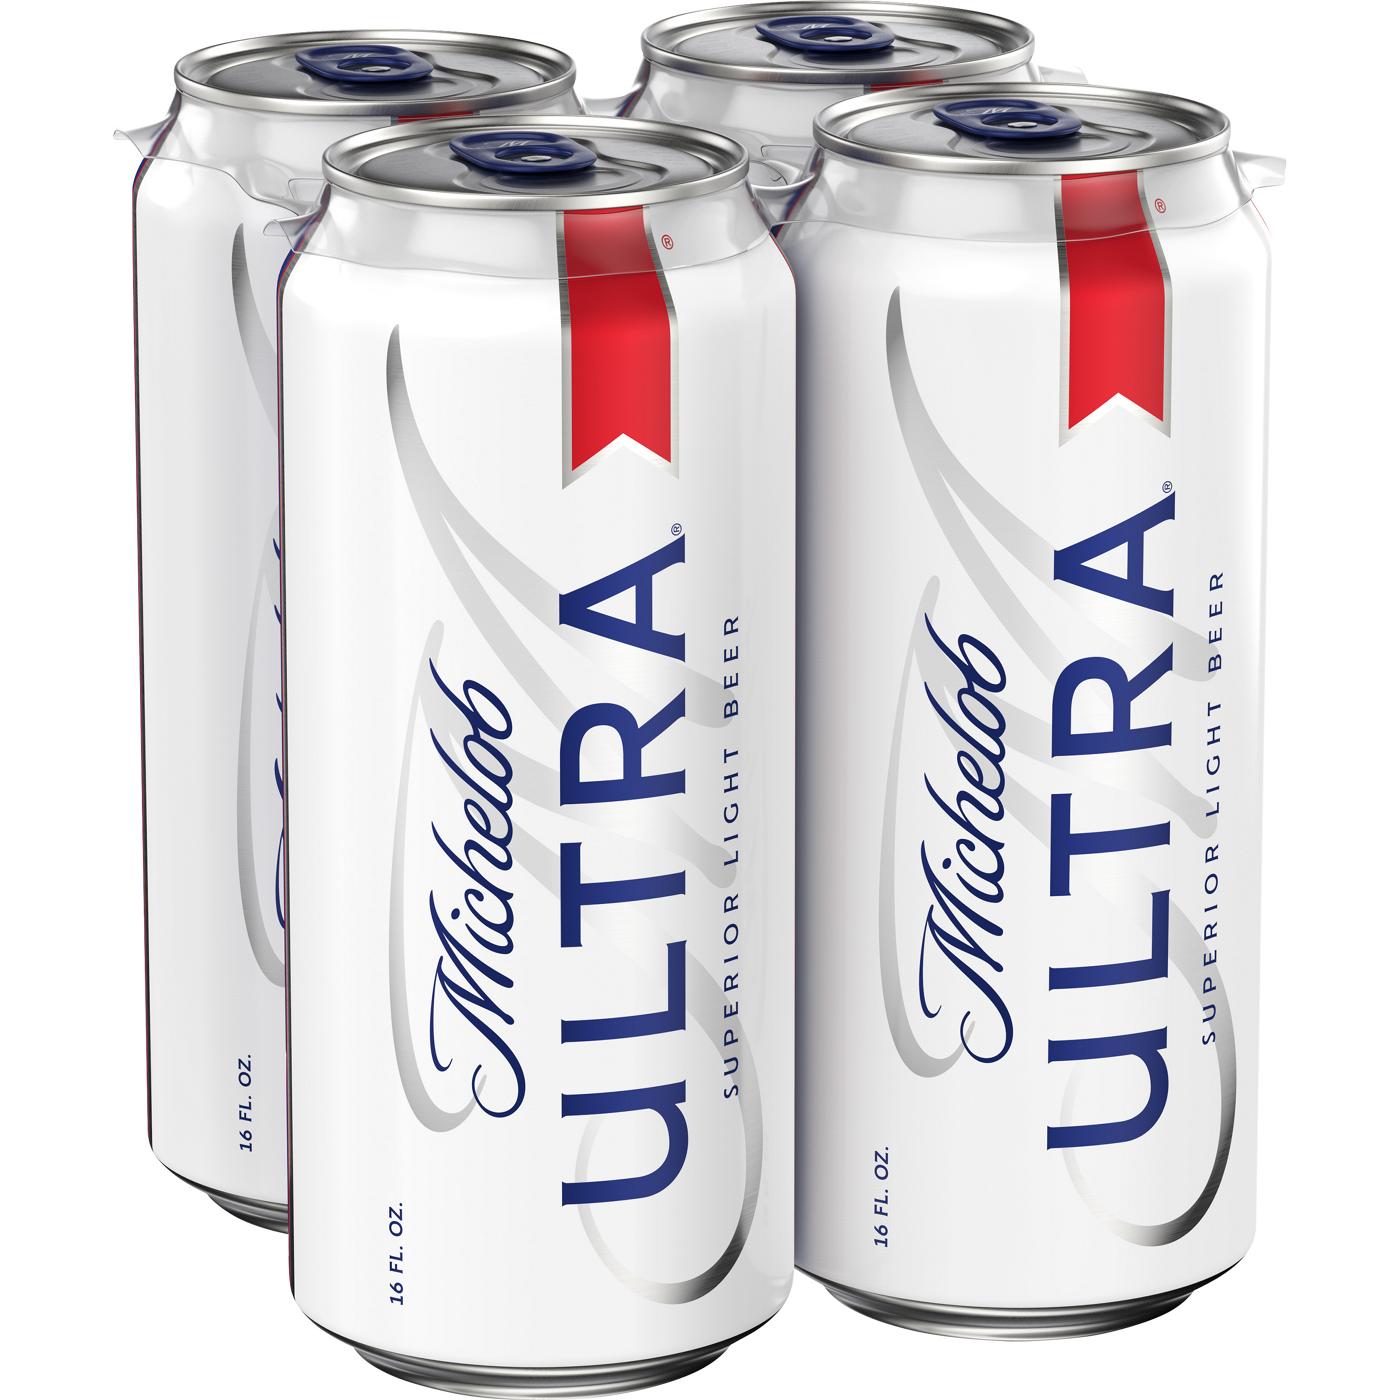 Michelob Ultra Beer 4 pk Cans; image 1 of 4